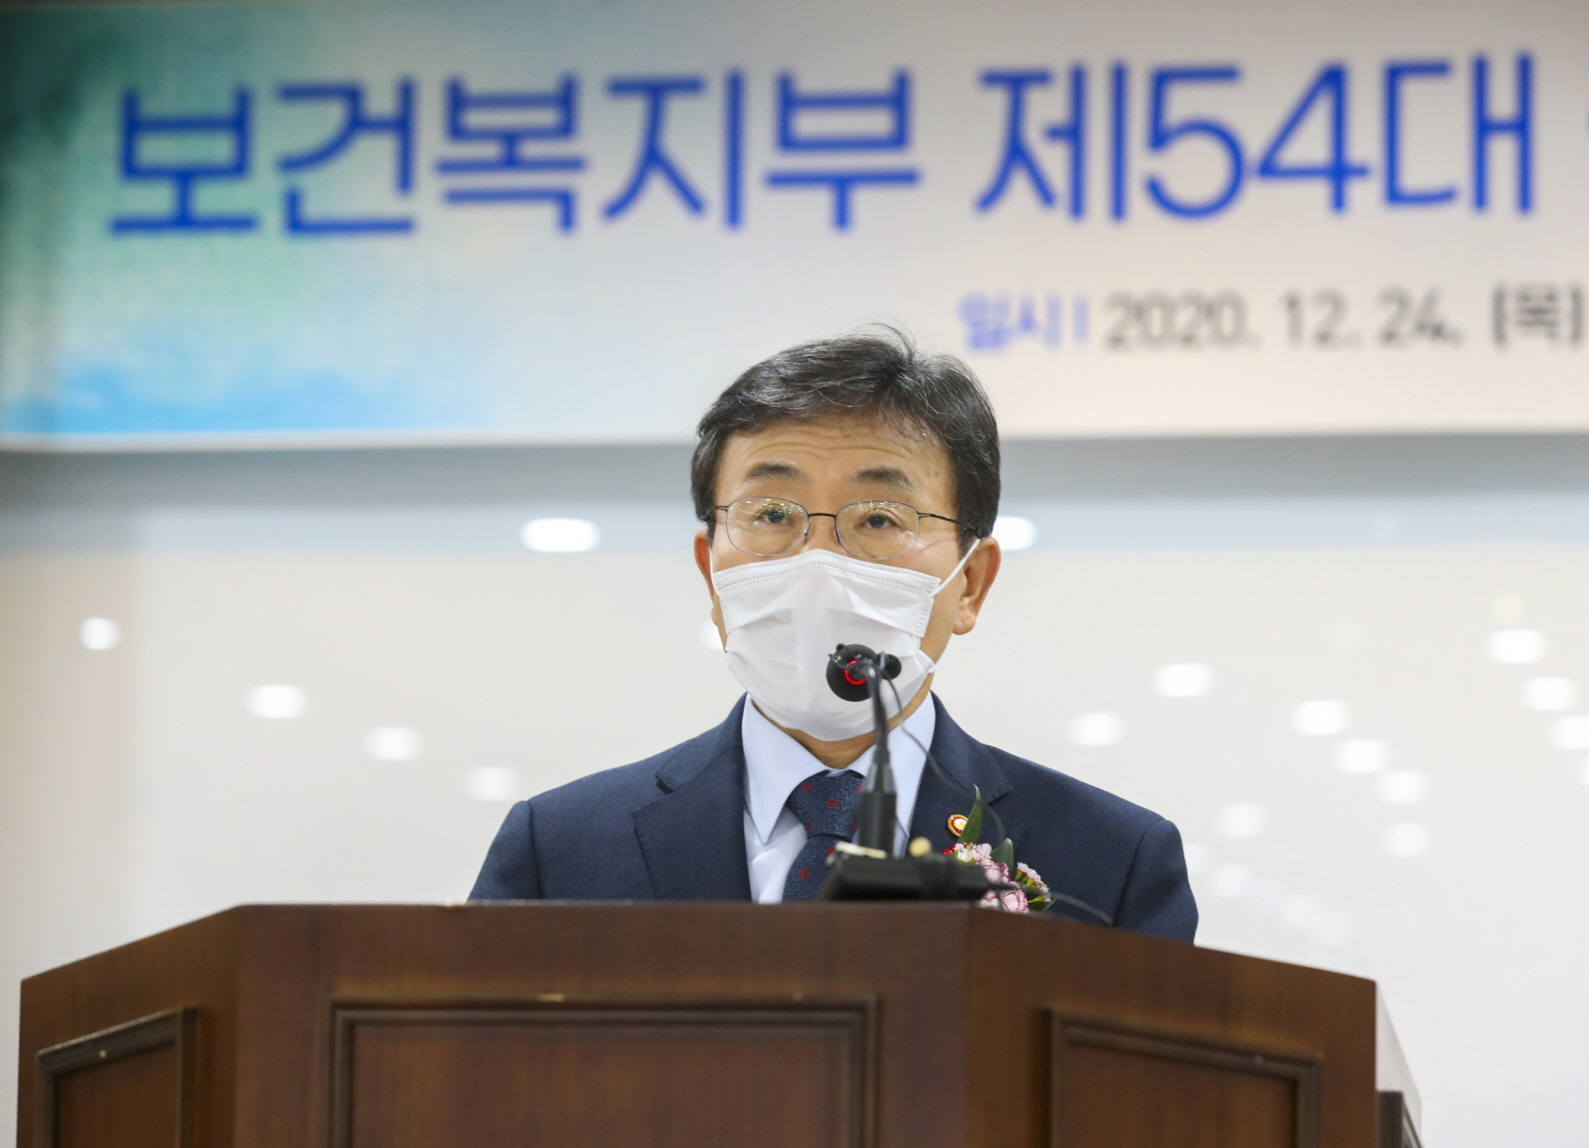 Mr. Kwon Deok-cheol Inaugurated as the 54th Minister of Health and Welfare (December 24) 사진11